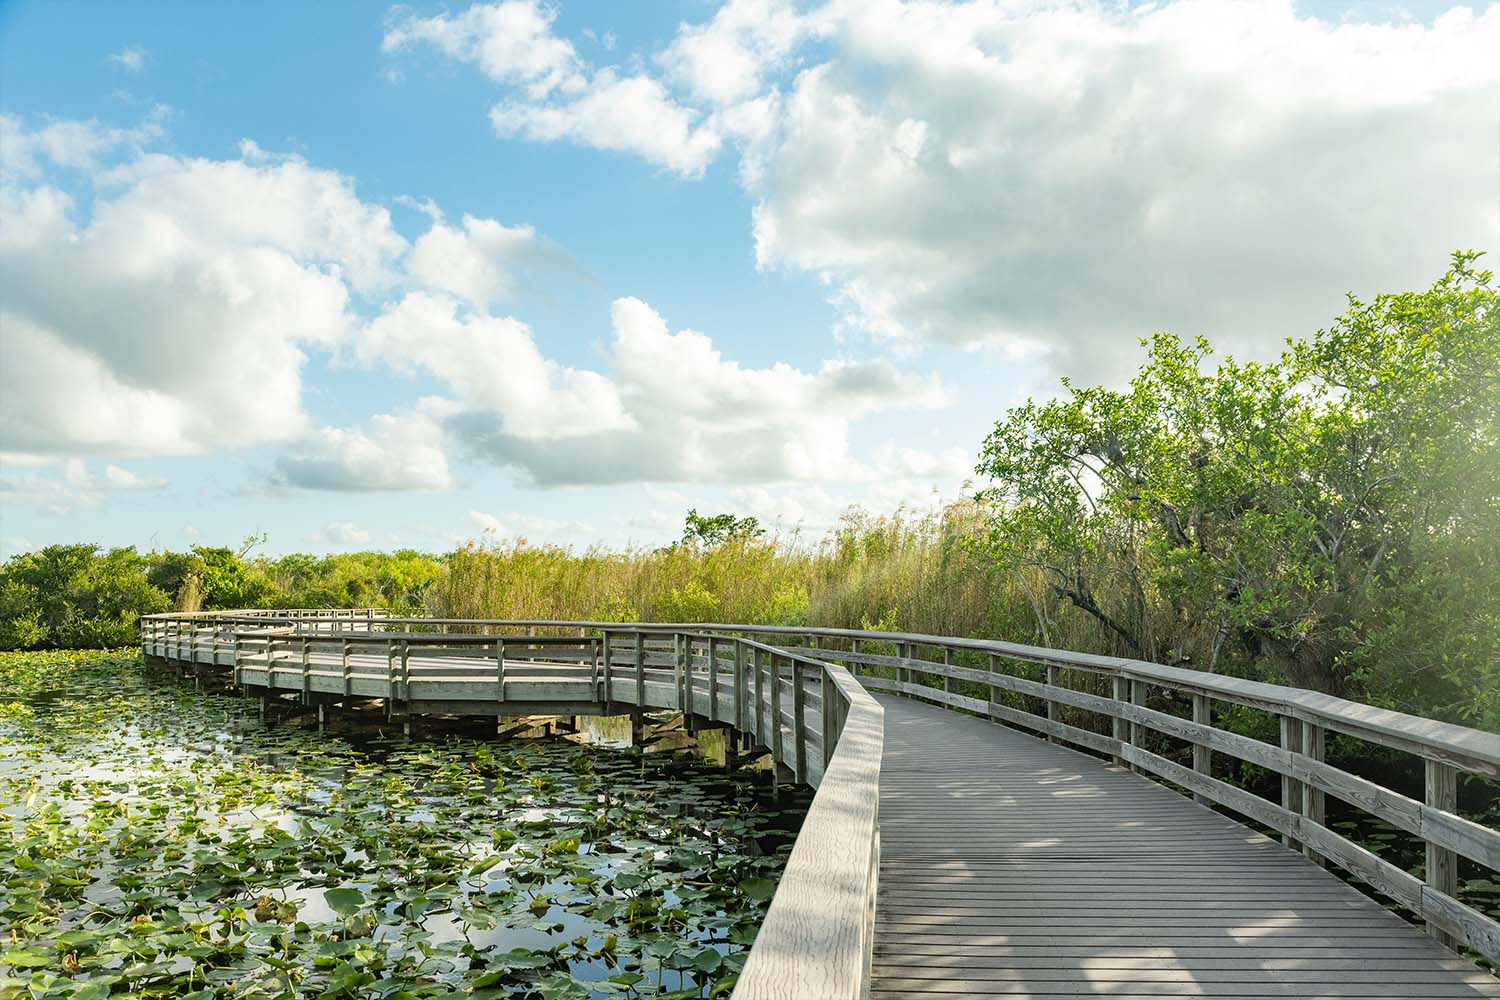 A wooden boardwalk curves over the scenic nature in Everglades National Park